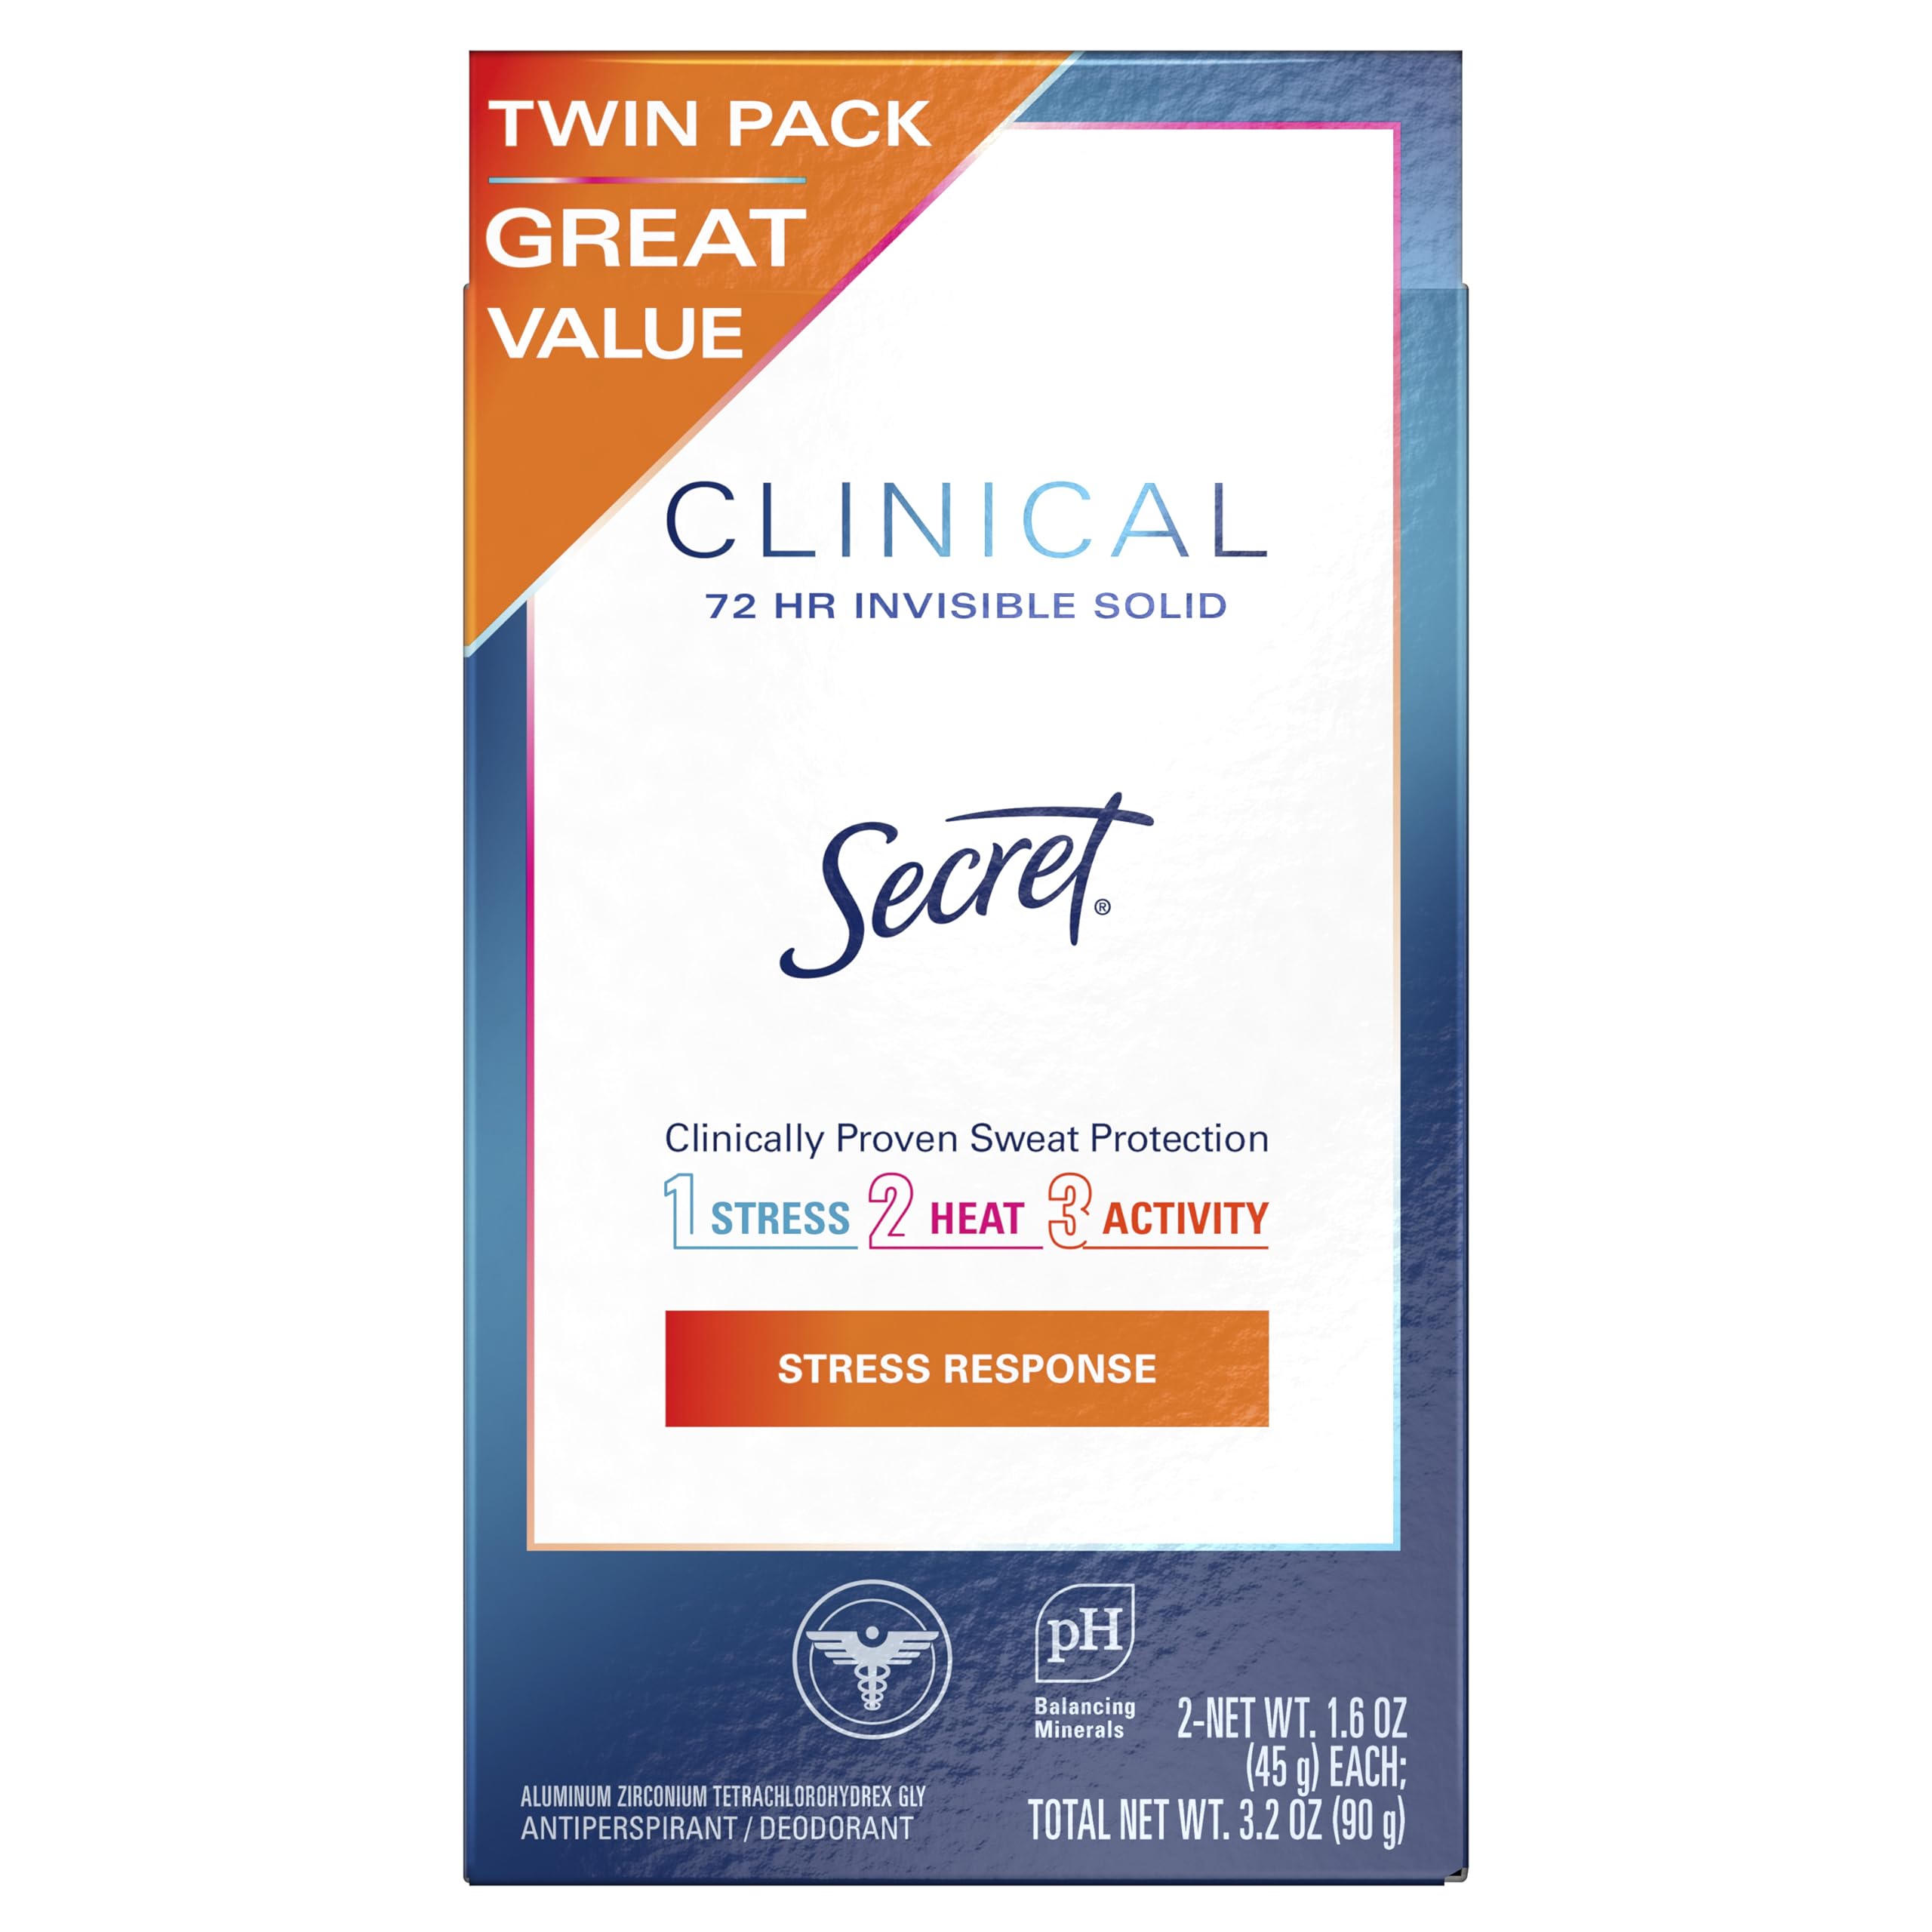 Secret Clinical Strength Invisible Solid Antiperspirant and Deodorant for Women, Stress Response, Twin Pack 1.6 oz each, 3.2oz Total